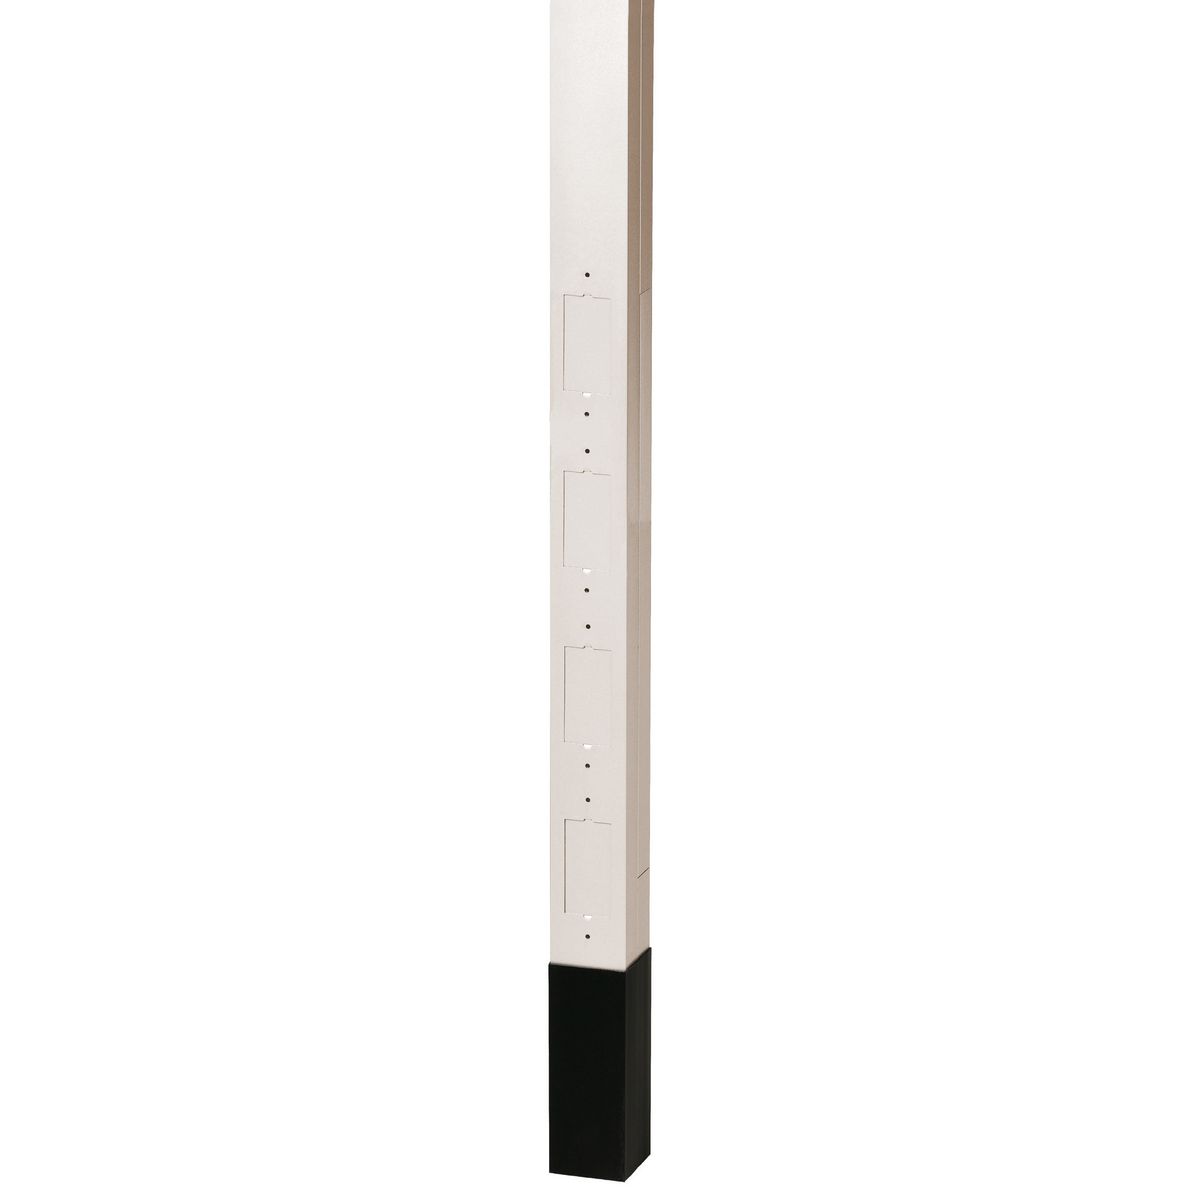 SVCE POLE, 10'2", BLANK /DIVIDER, OW